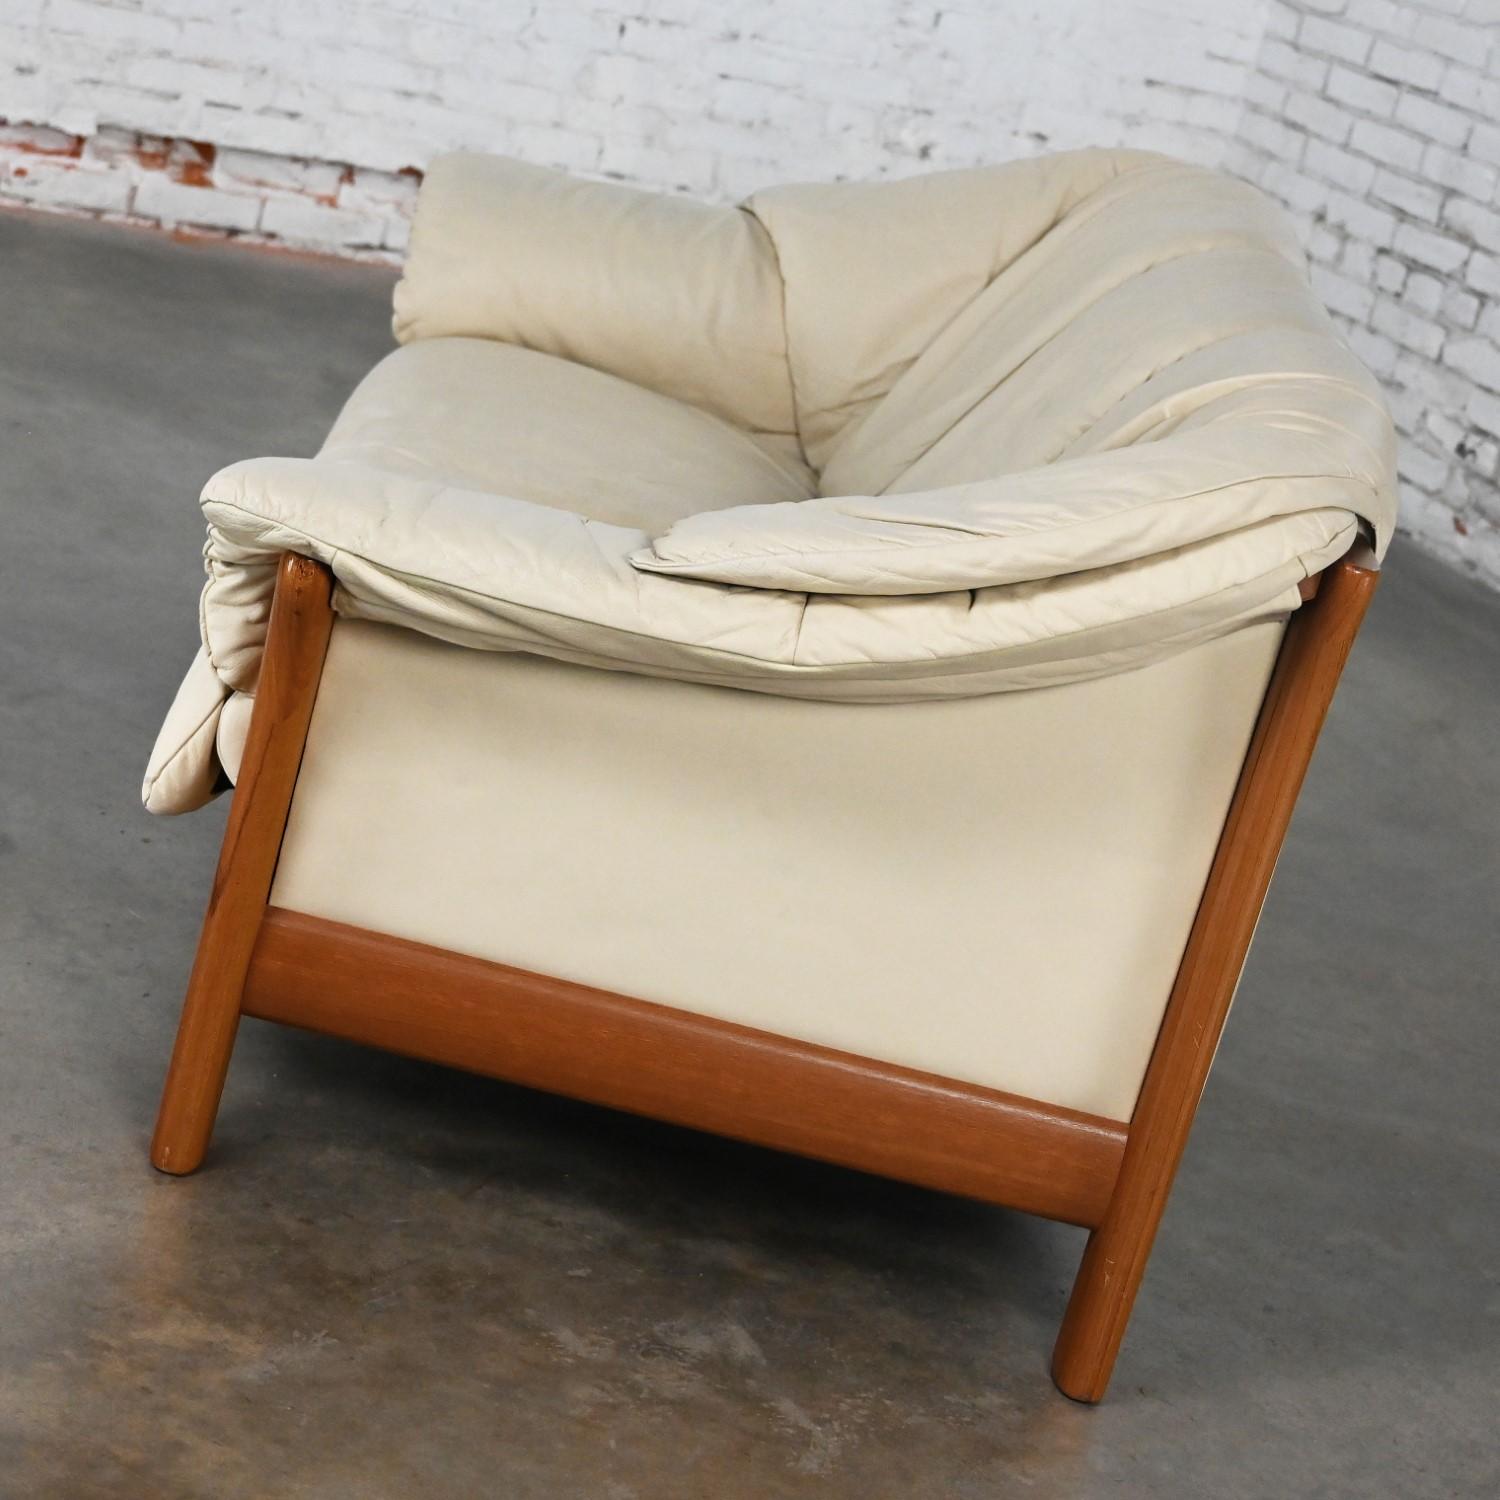 Scandinavian Modern Teak & Off White Leather Small Sofa Attributed to Ekornes For Sale 3